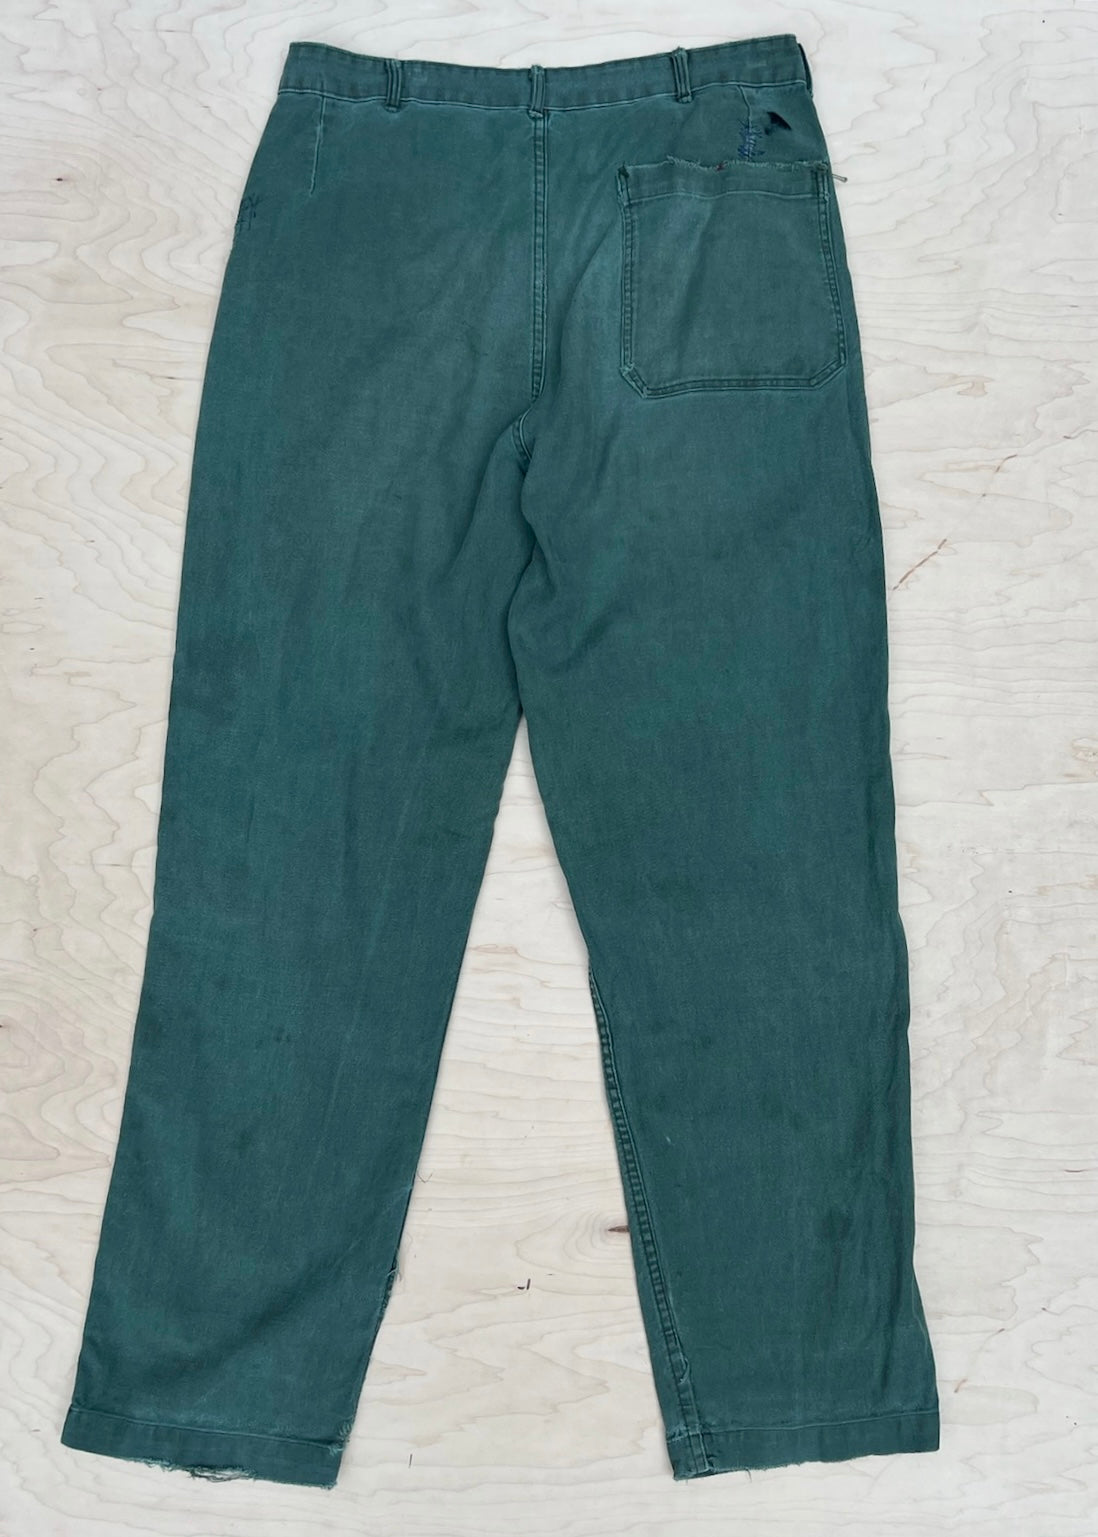 GREEN EMBROIDERED PATCHWORK PANTS